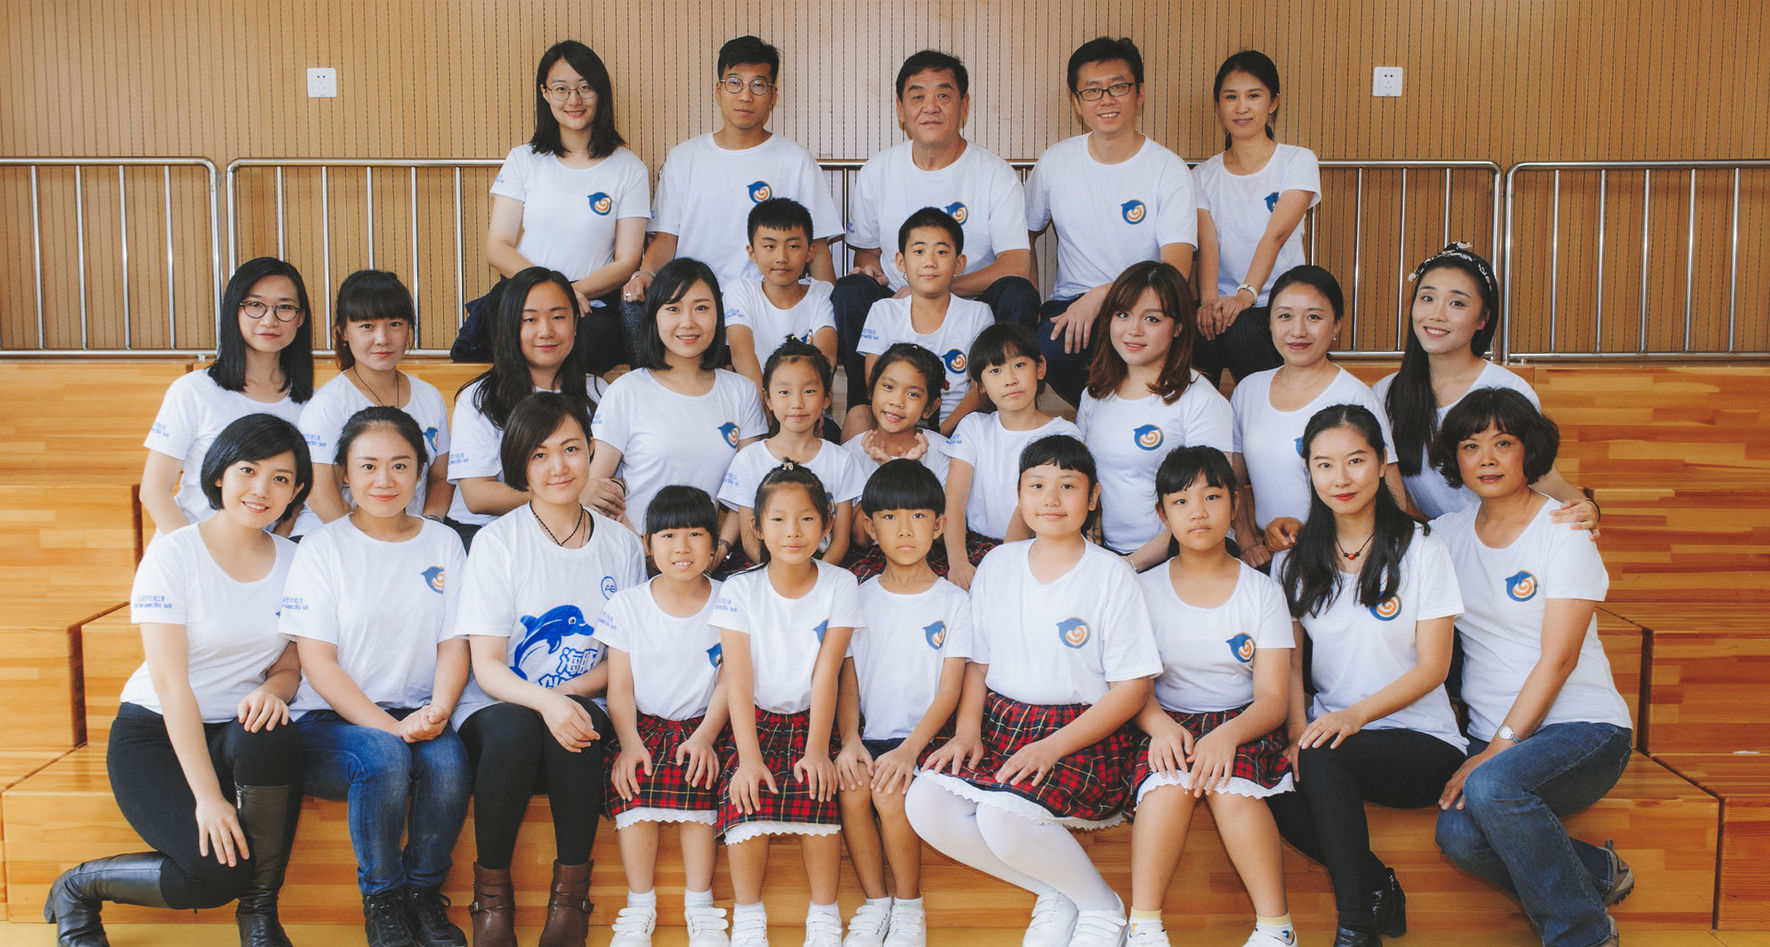 Tianjin Dolphin Hearing Disabled Children’s Choir, China © TDHDCC